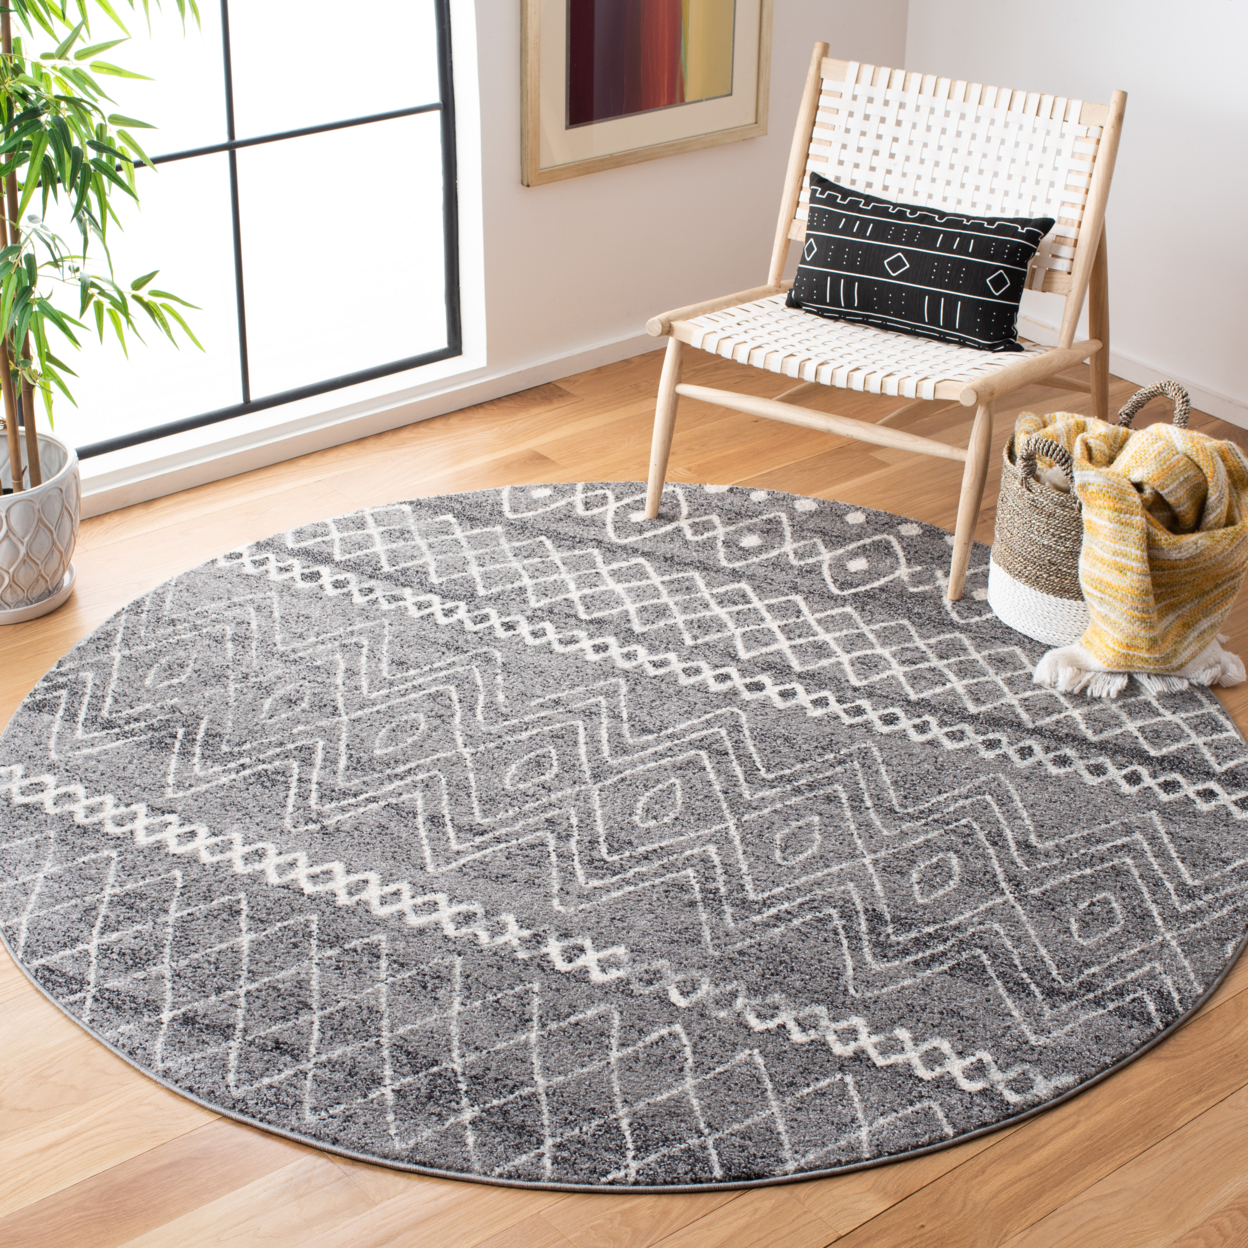 SAFAVIEH Madison Collection MAD798F Charcoal / Ivory Rug - 6-7 X 6-7 Round